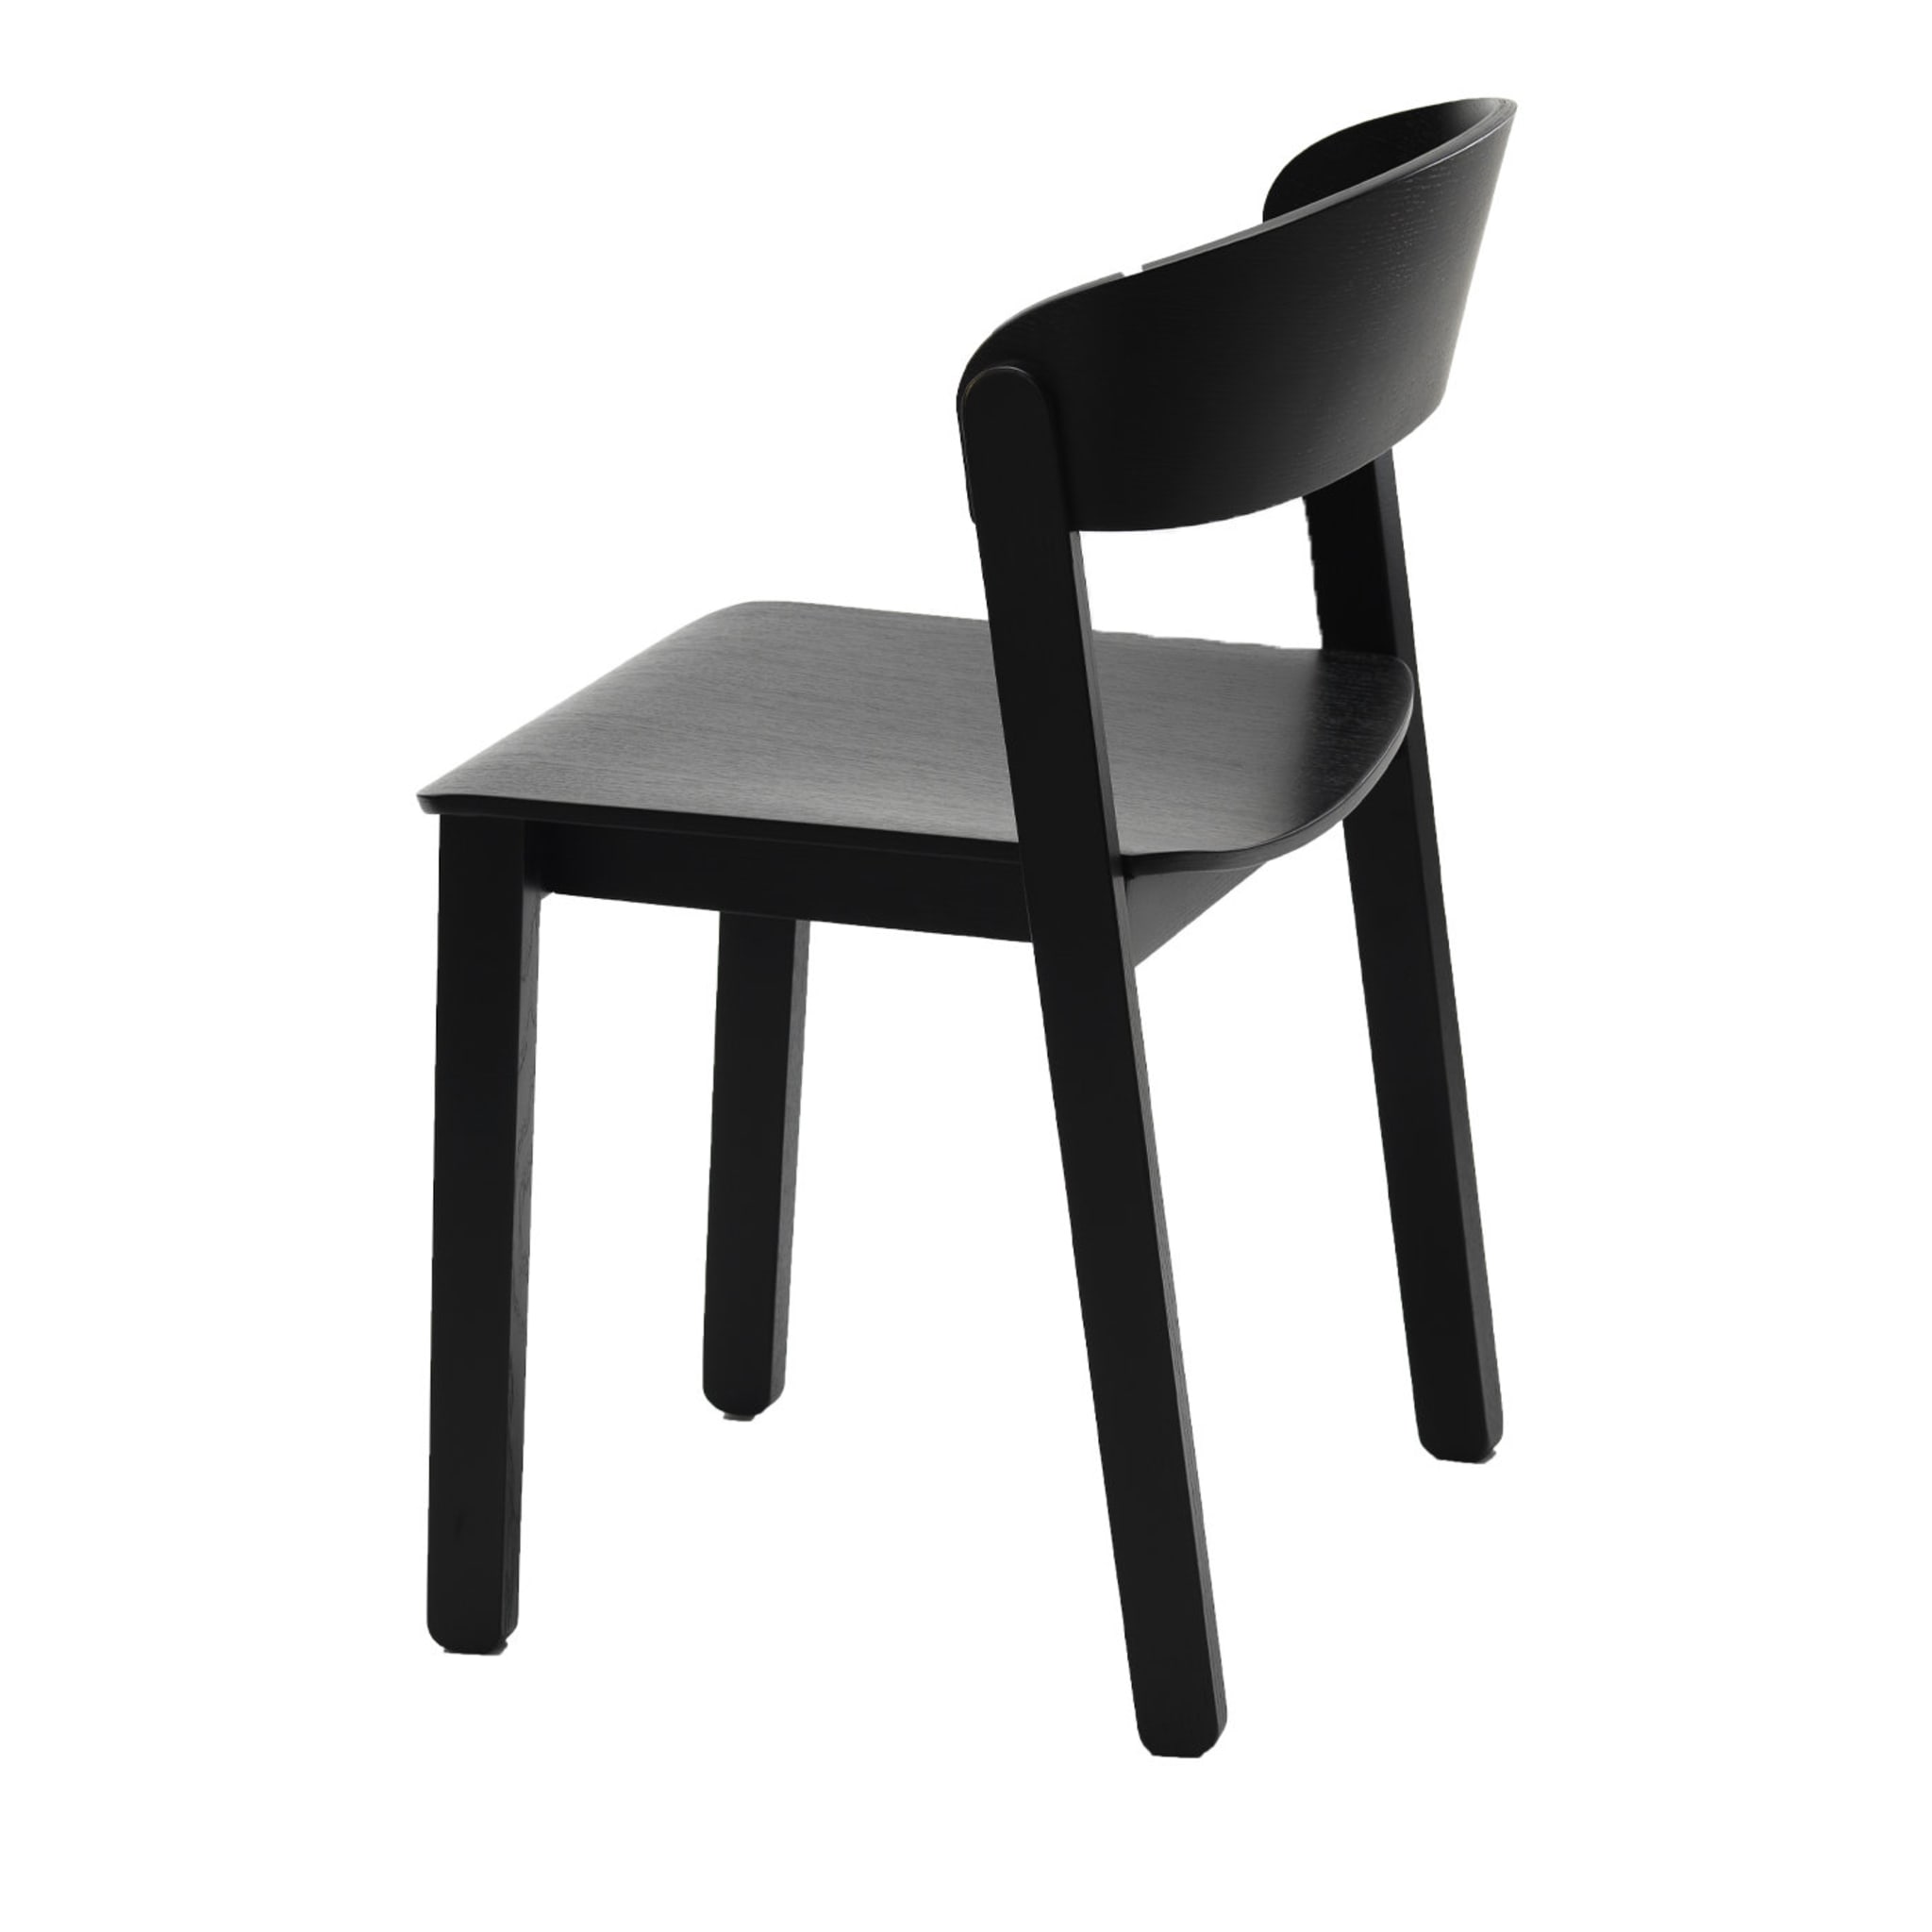 Set of 2 Pur Chairs by Note Design Studio - Main view